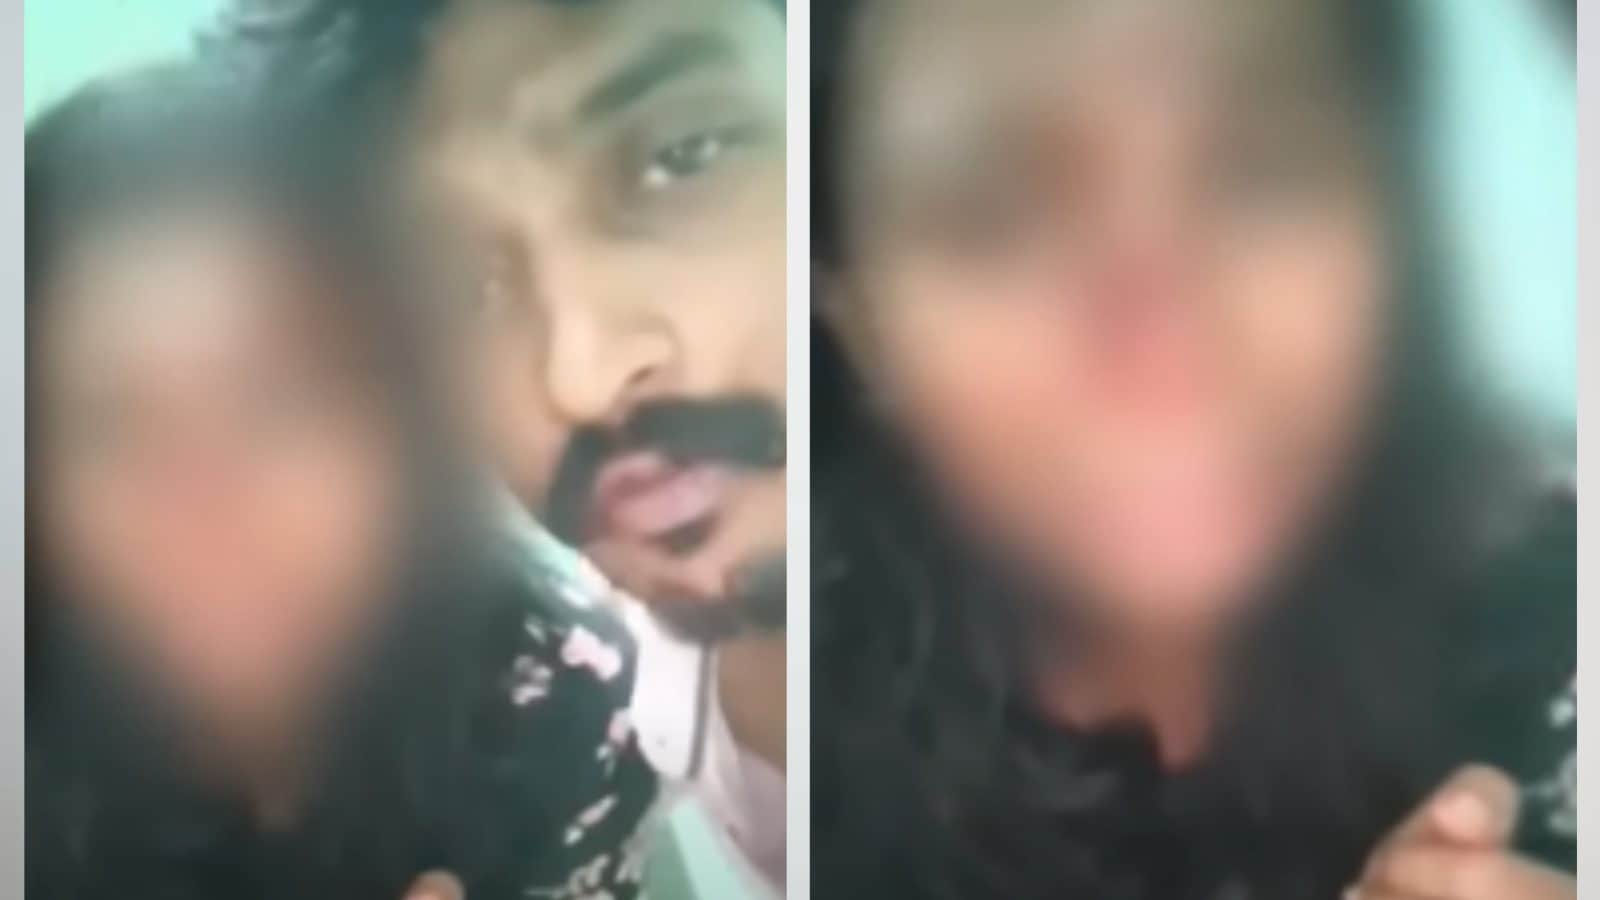 Kerala Man Thrashes Wife, Films Assault, Shares Video With Friends. All She  Wanted Was To Work - News18